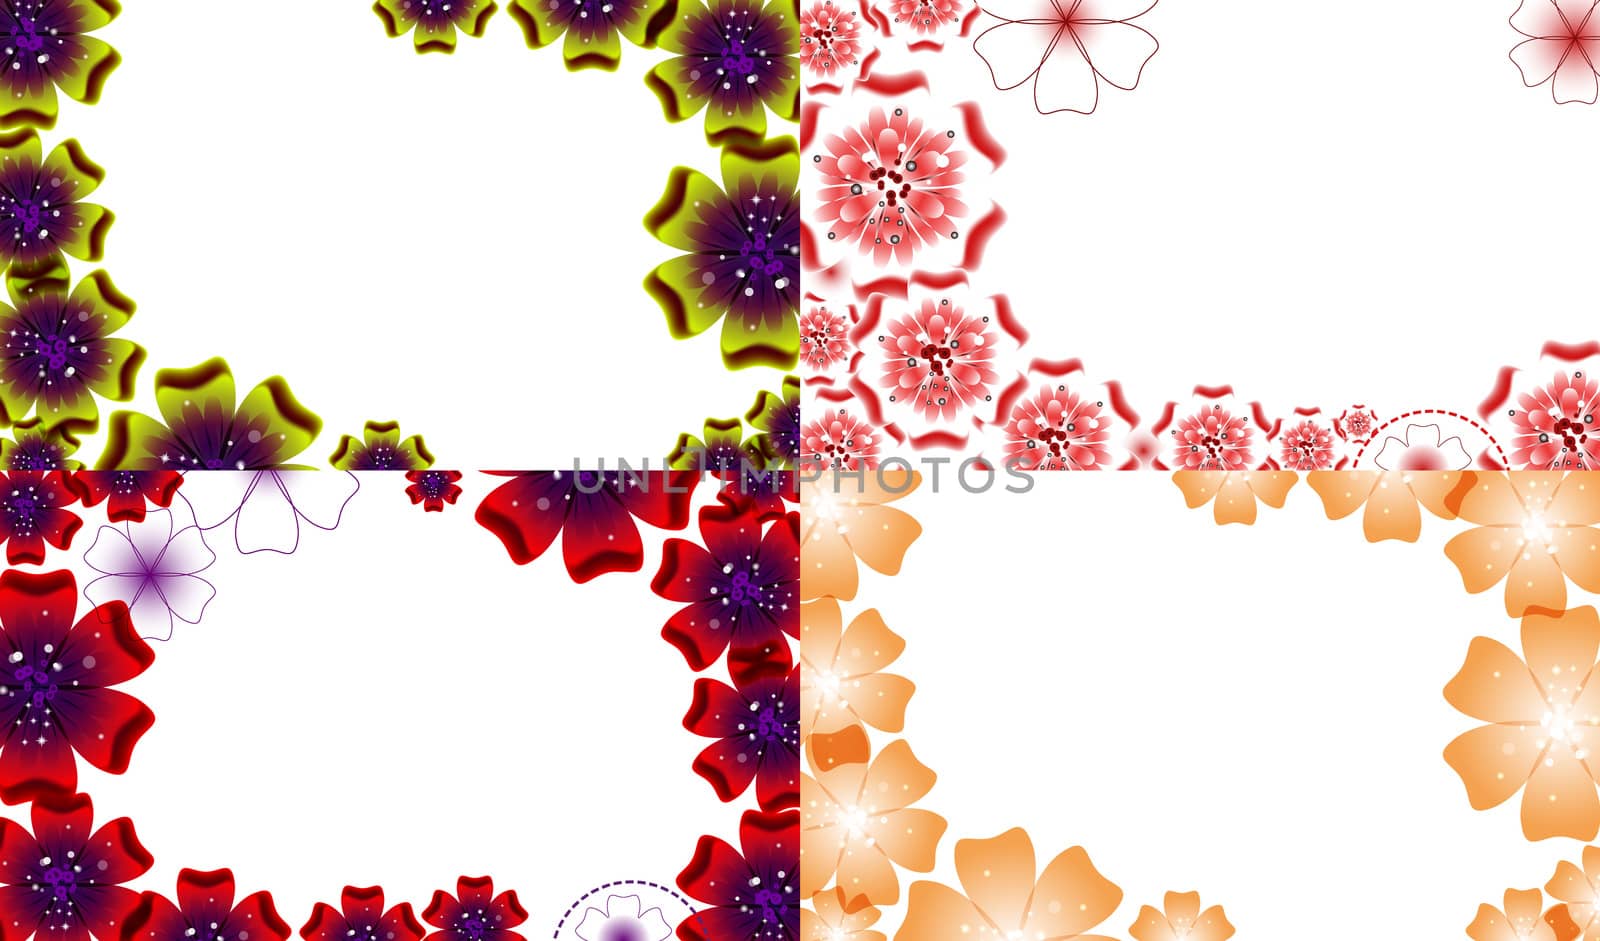 Set of background with Flowers isolated on white sample text.  illustration